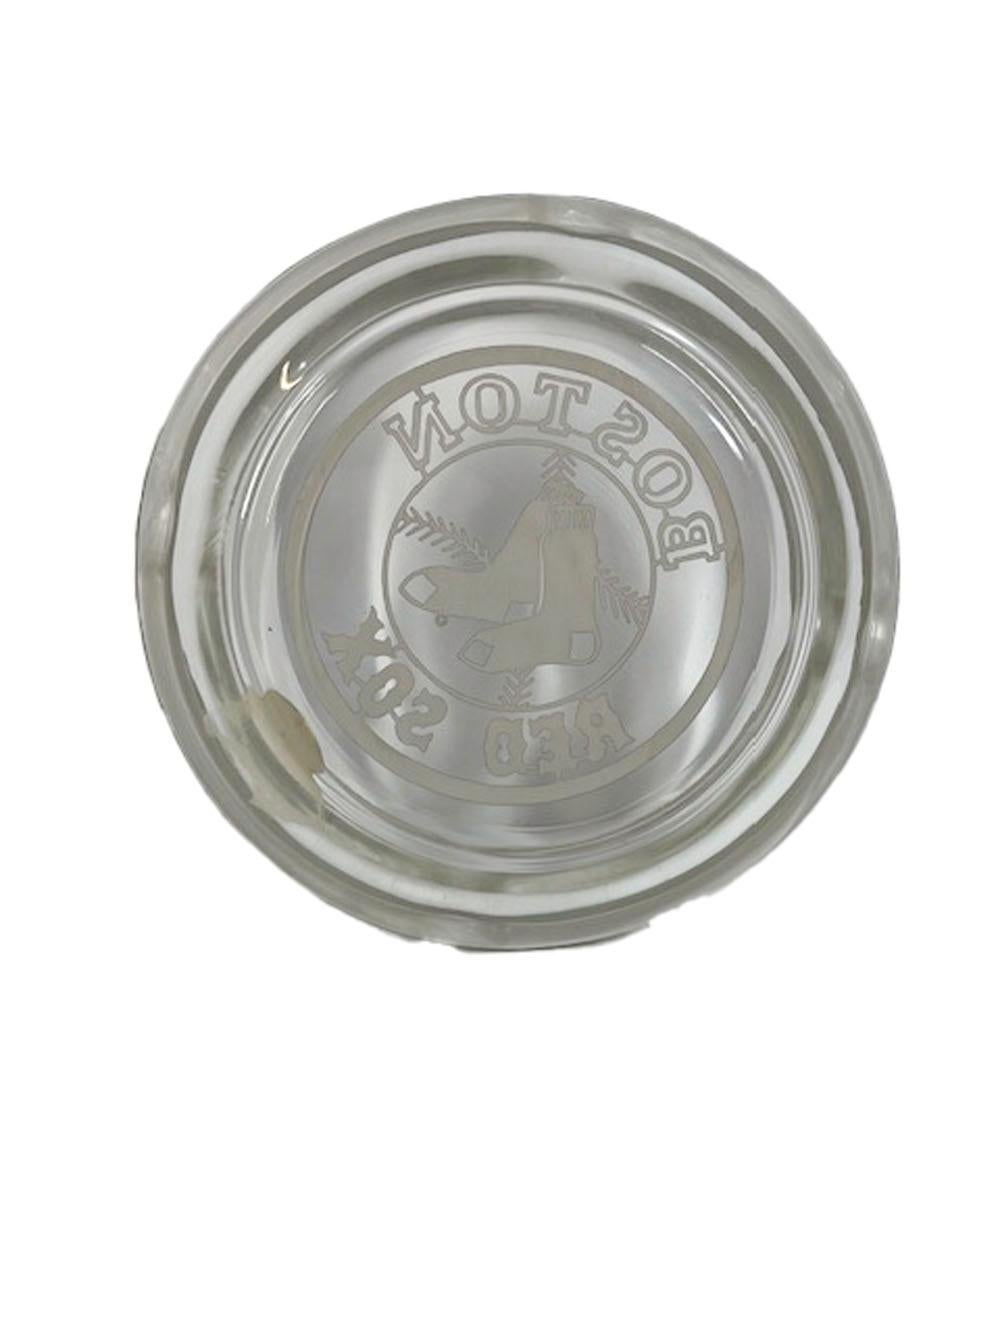 Vintage sterling silver overlay ashtray by Rockwell Silver Company. A circular clear glass ashtray with a silver overlay rim having 4 divots centering a silver overlay image of the Boston Red Sox logo. Retaining its original label.